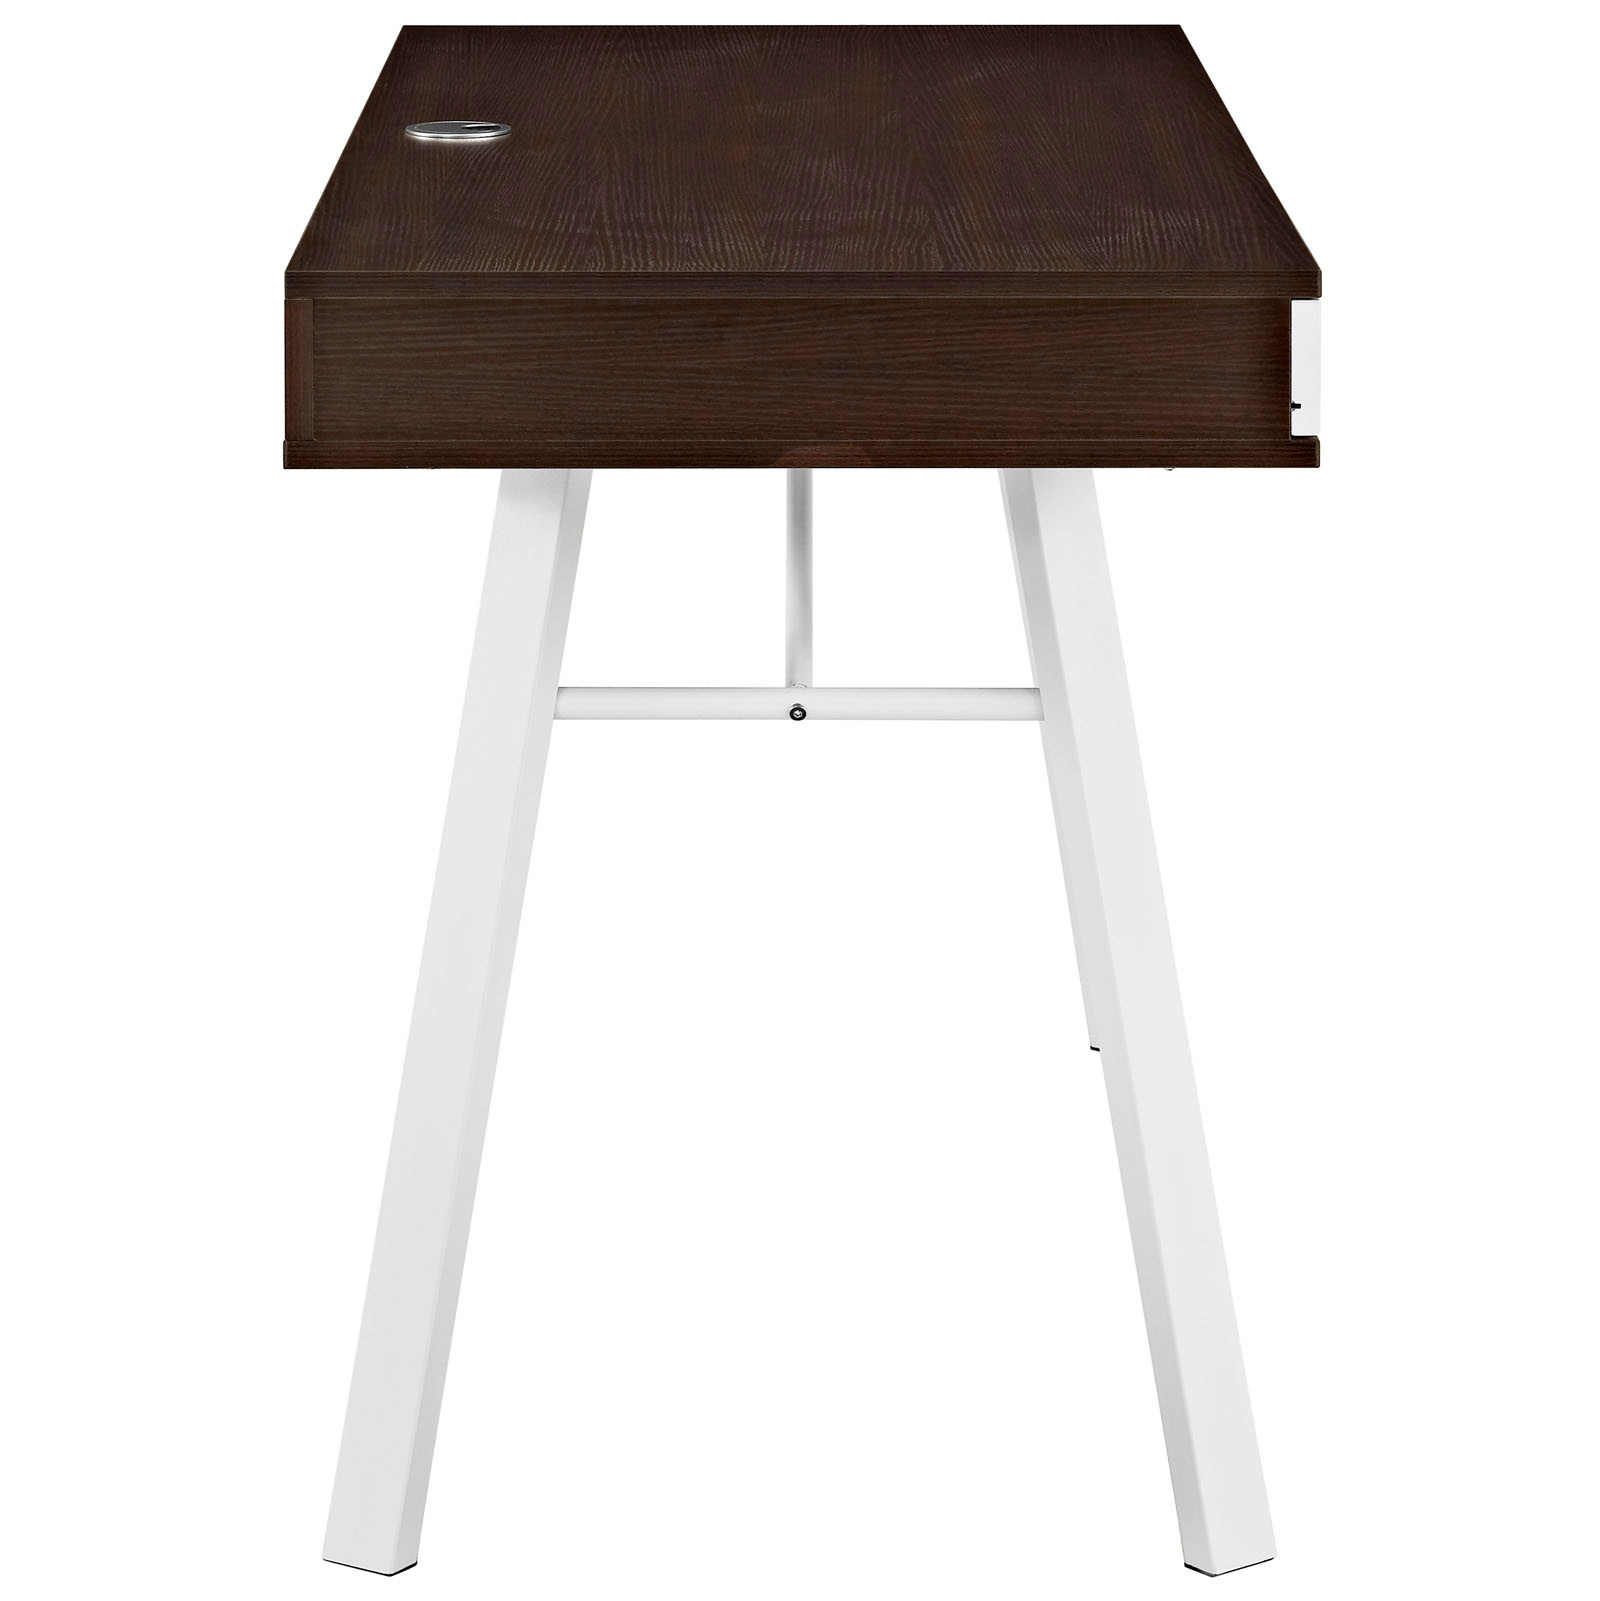 Space saving desk from Modway - Side View - Shown in Cherry (Brown)